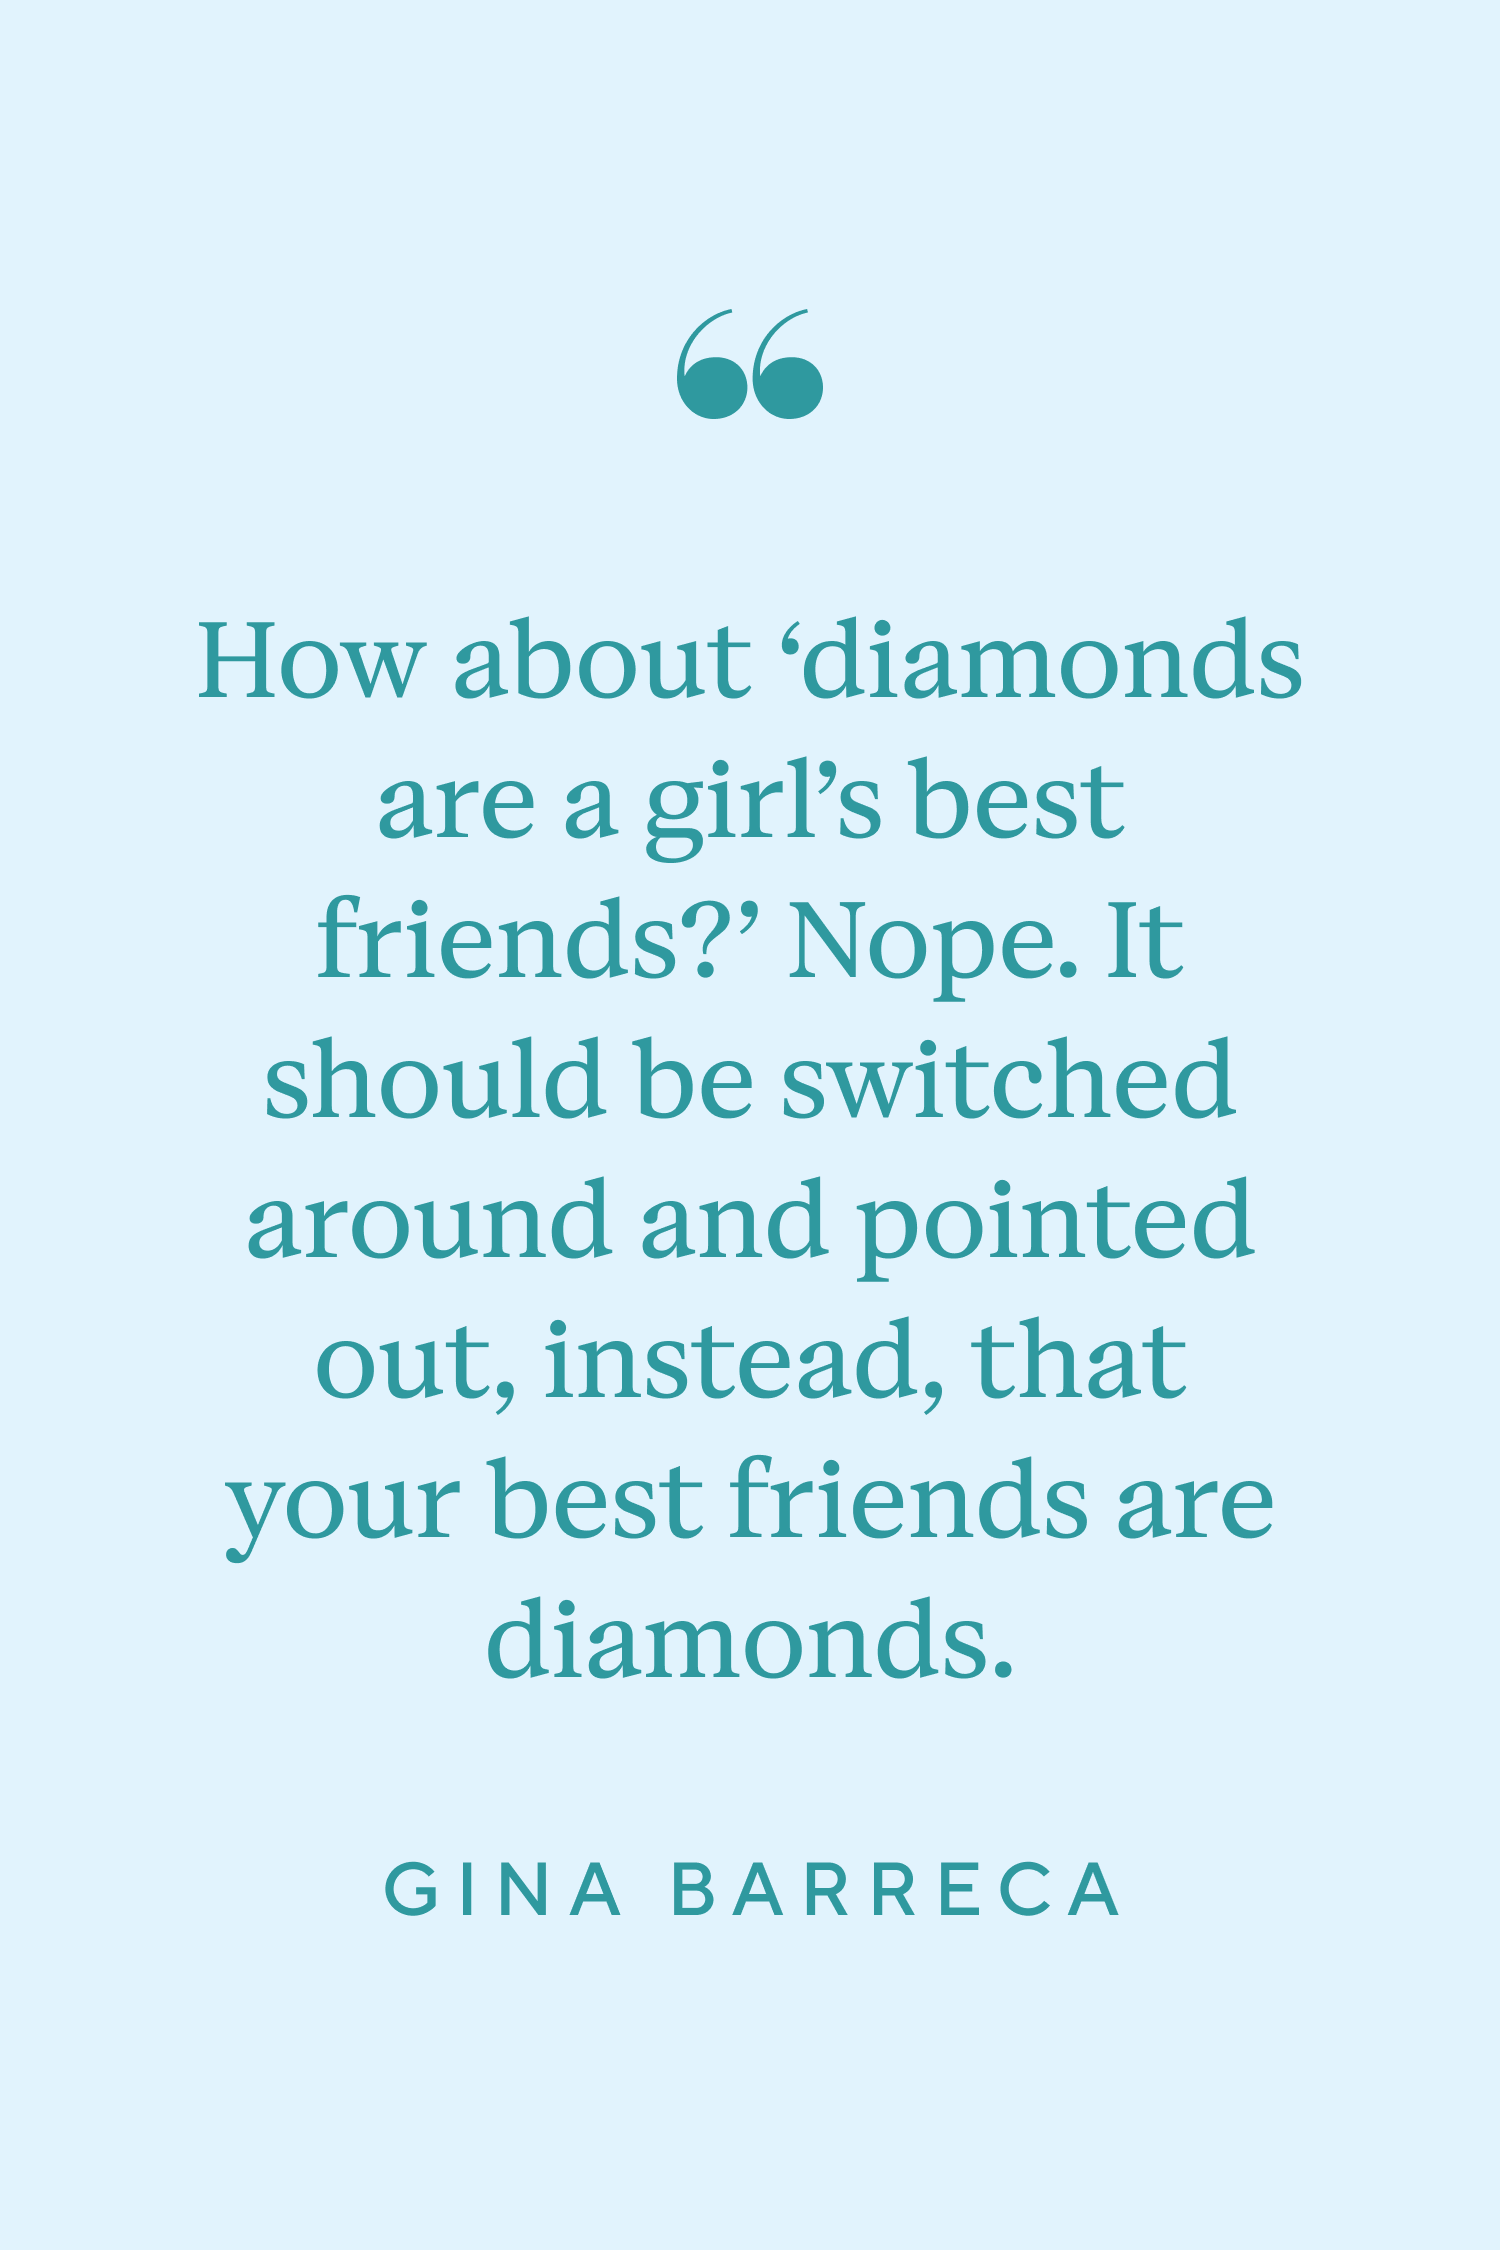 Best Friend Pictures With Friendship Quotes